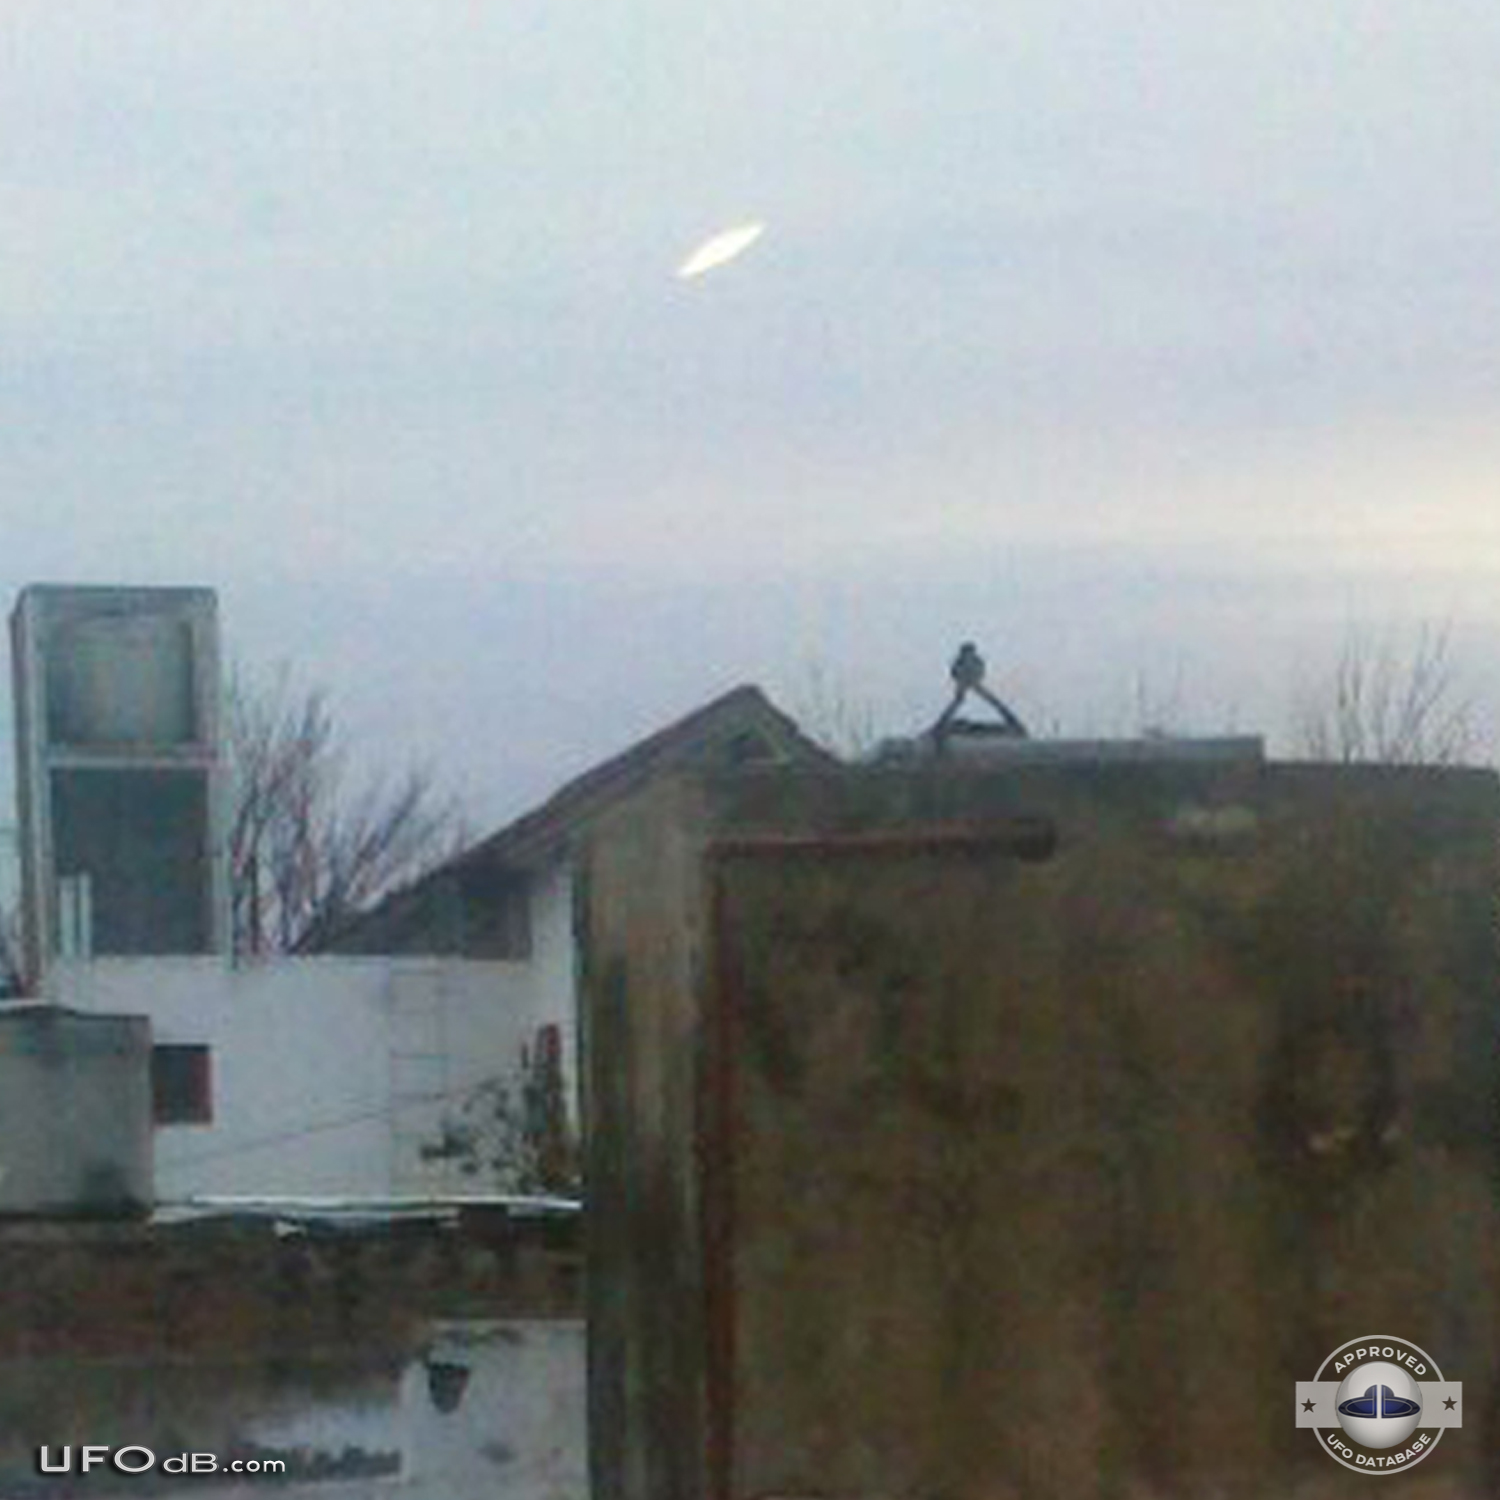 White Saucer UFO caught on photo in Bahia Blanca, Buenos Aires - 2012 UFO Picture #522-3